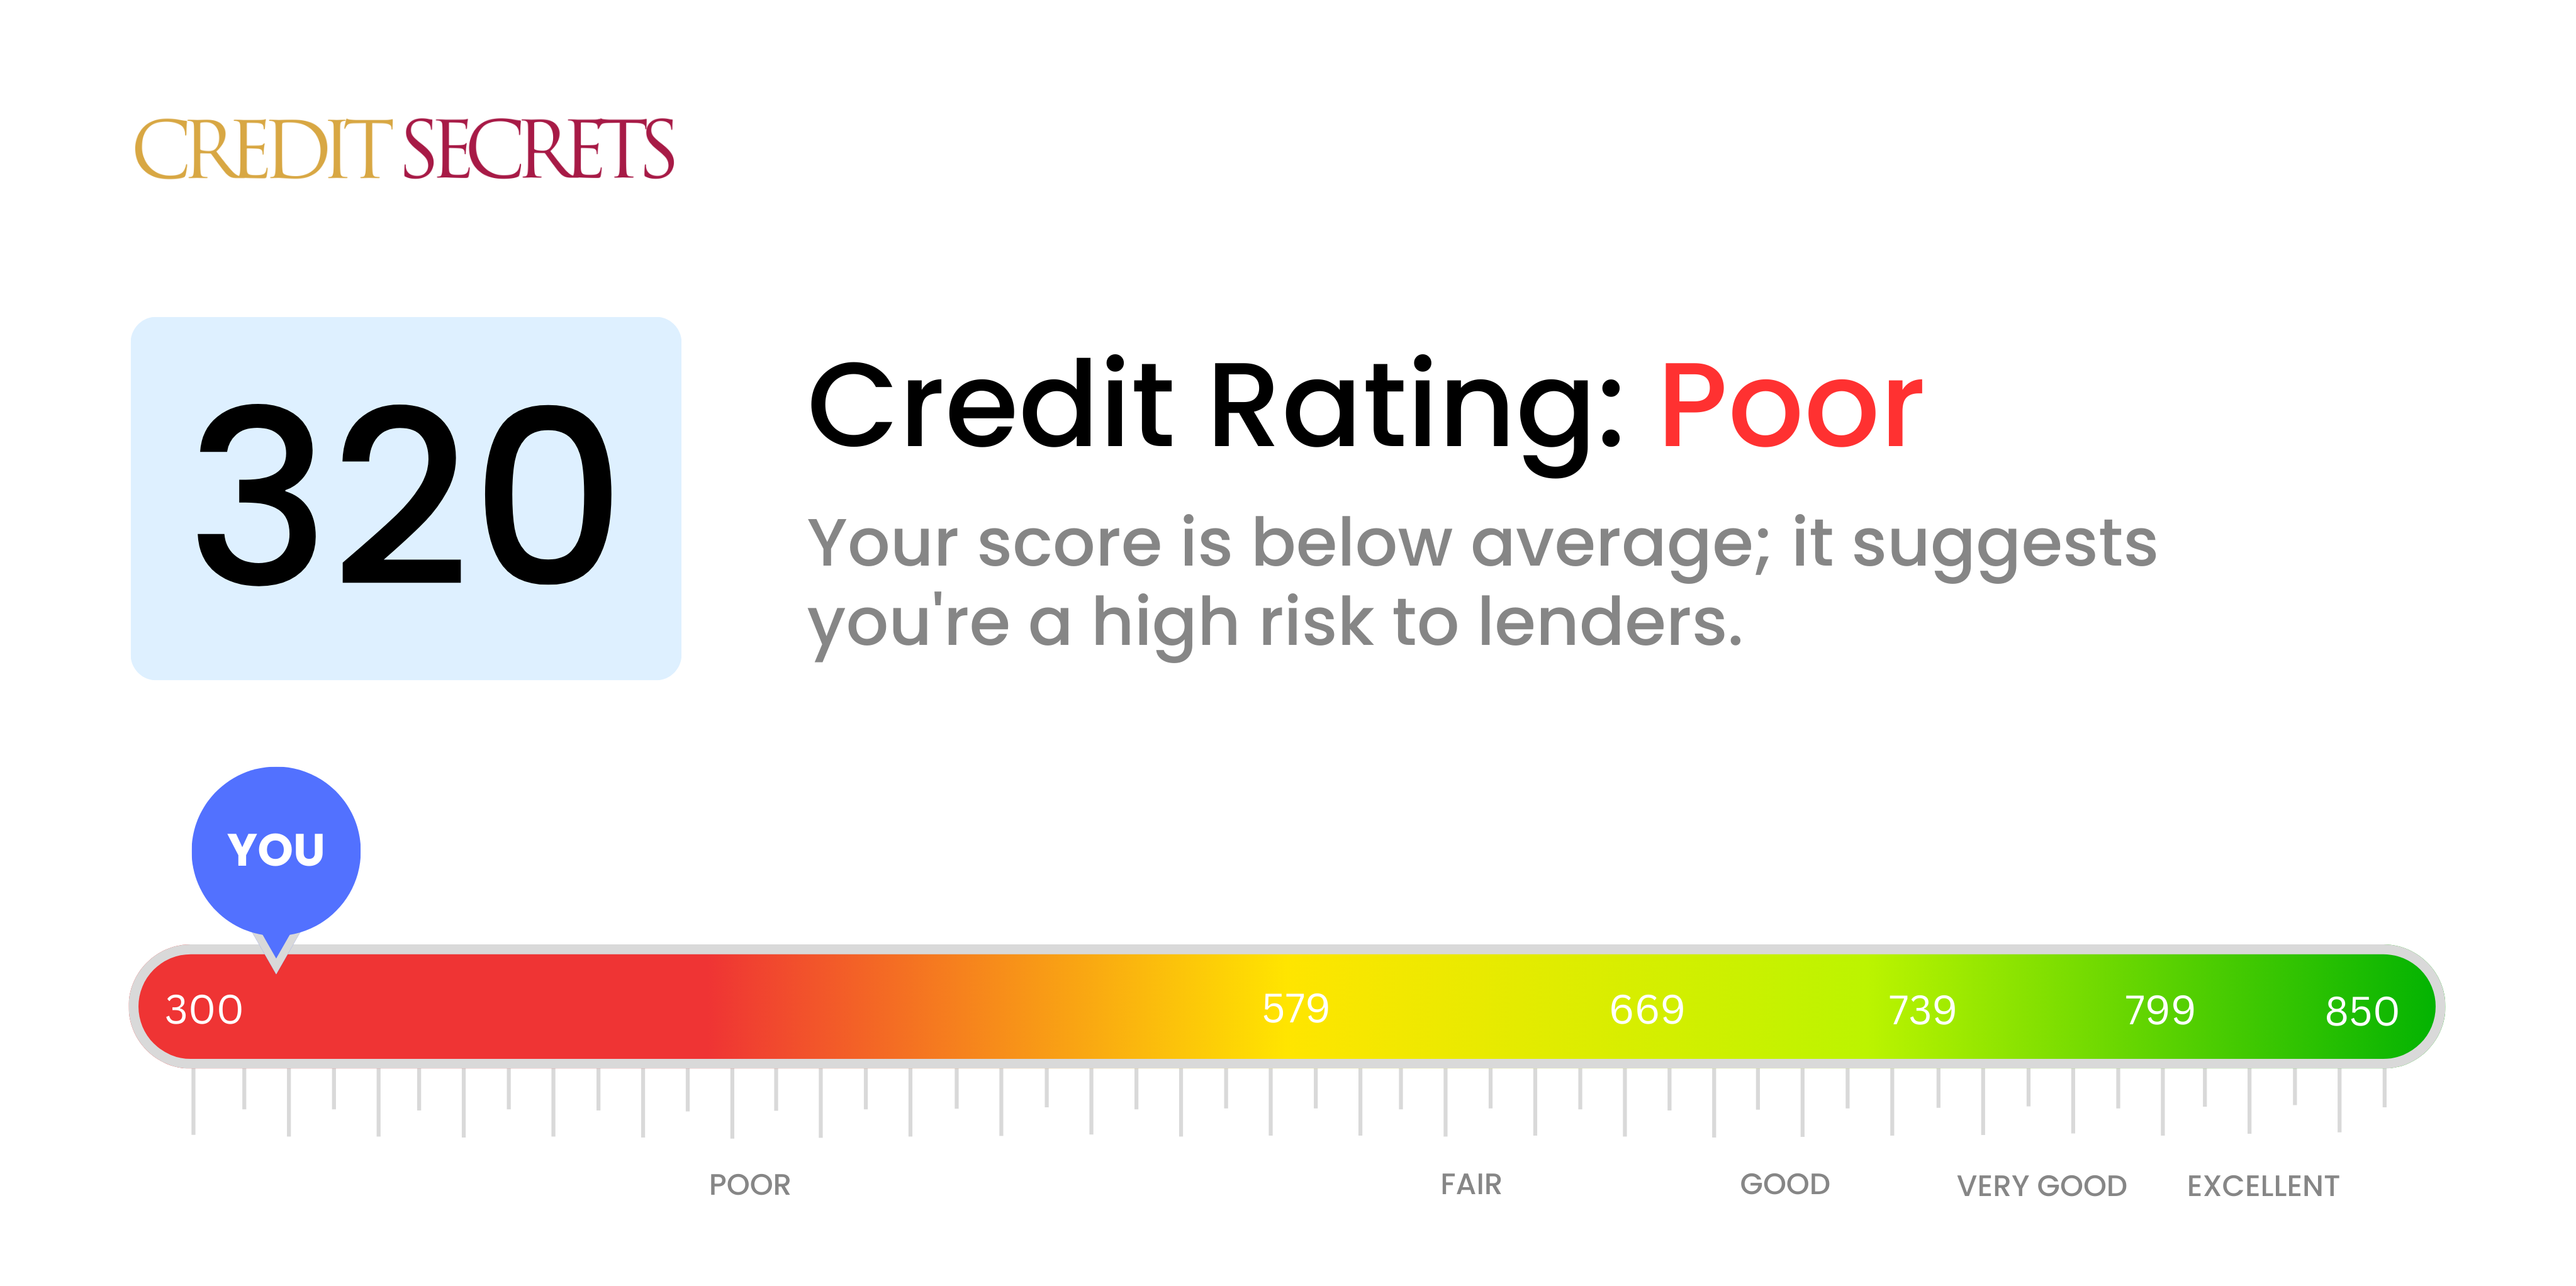 Is 320 a good credit score?